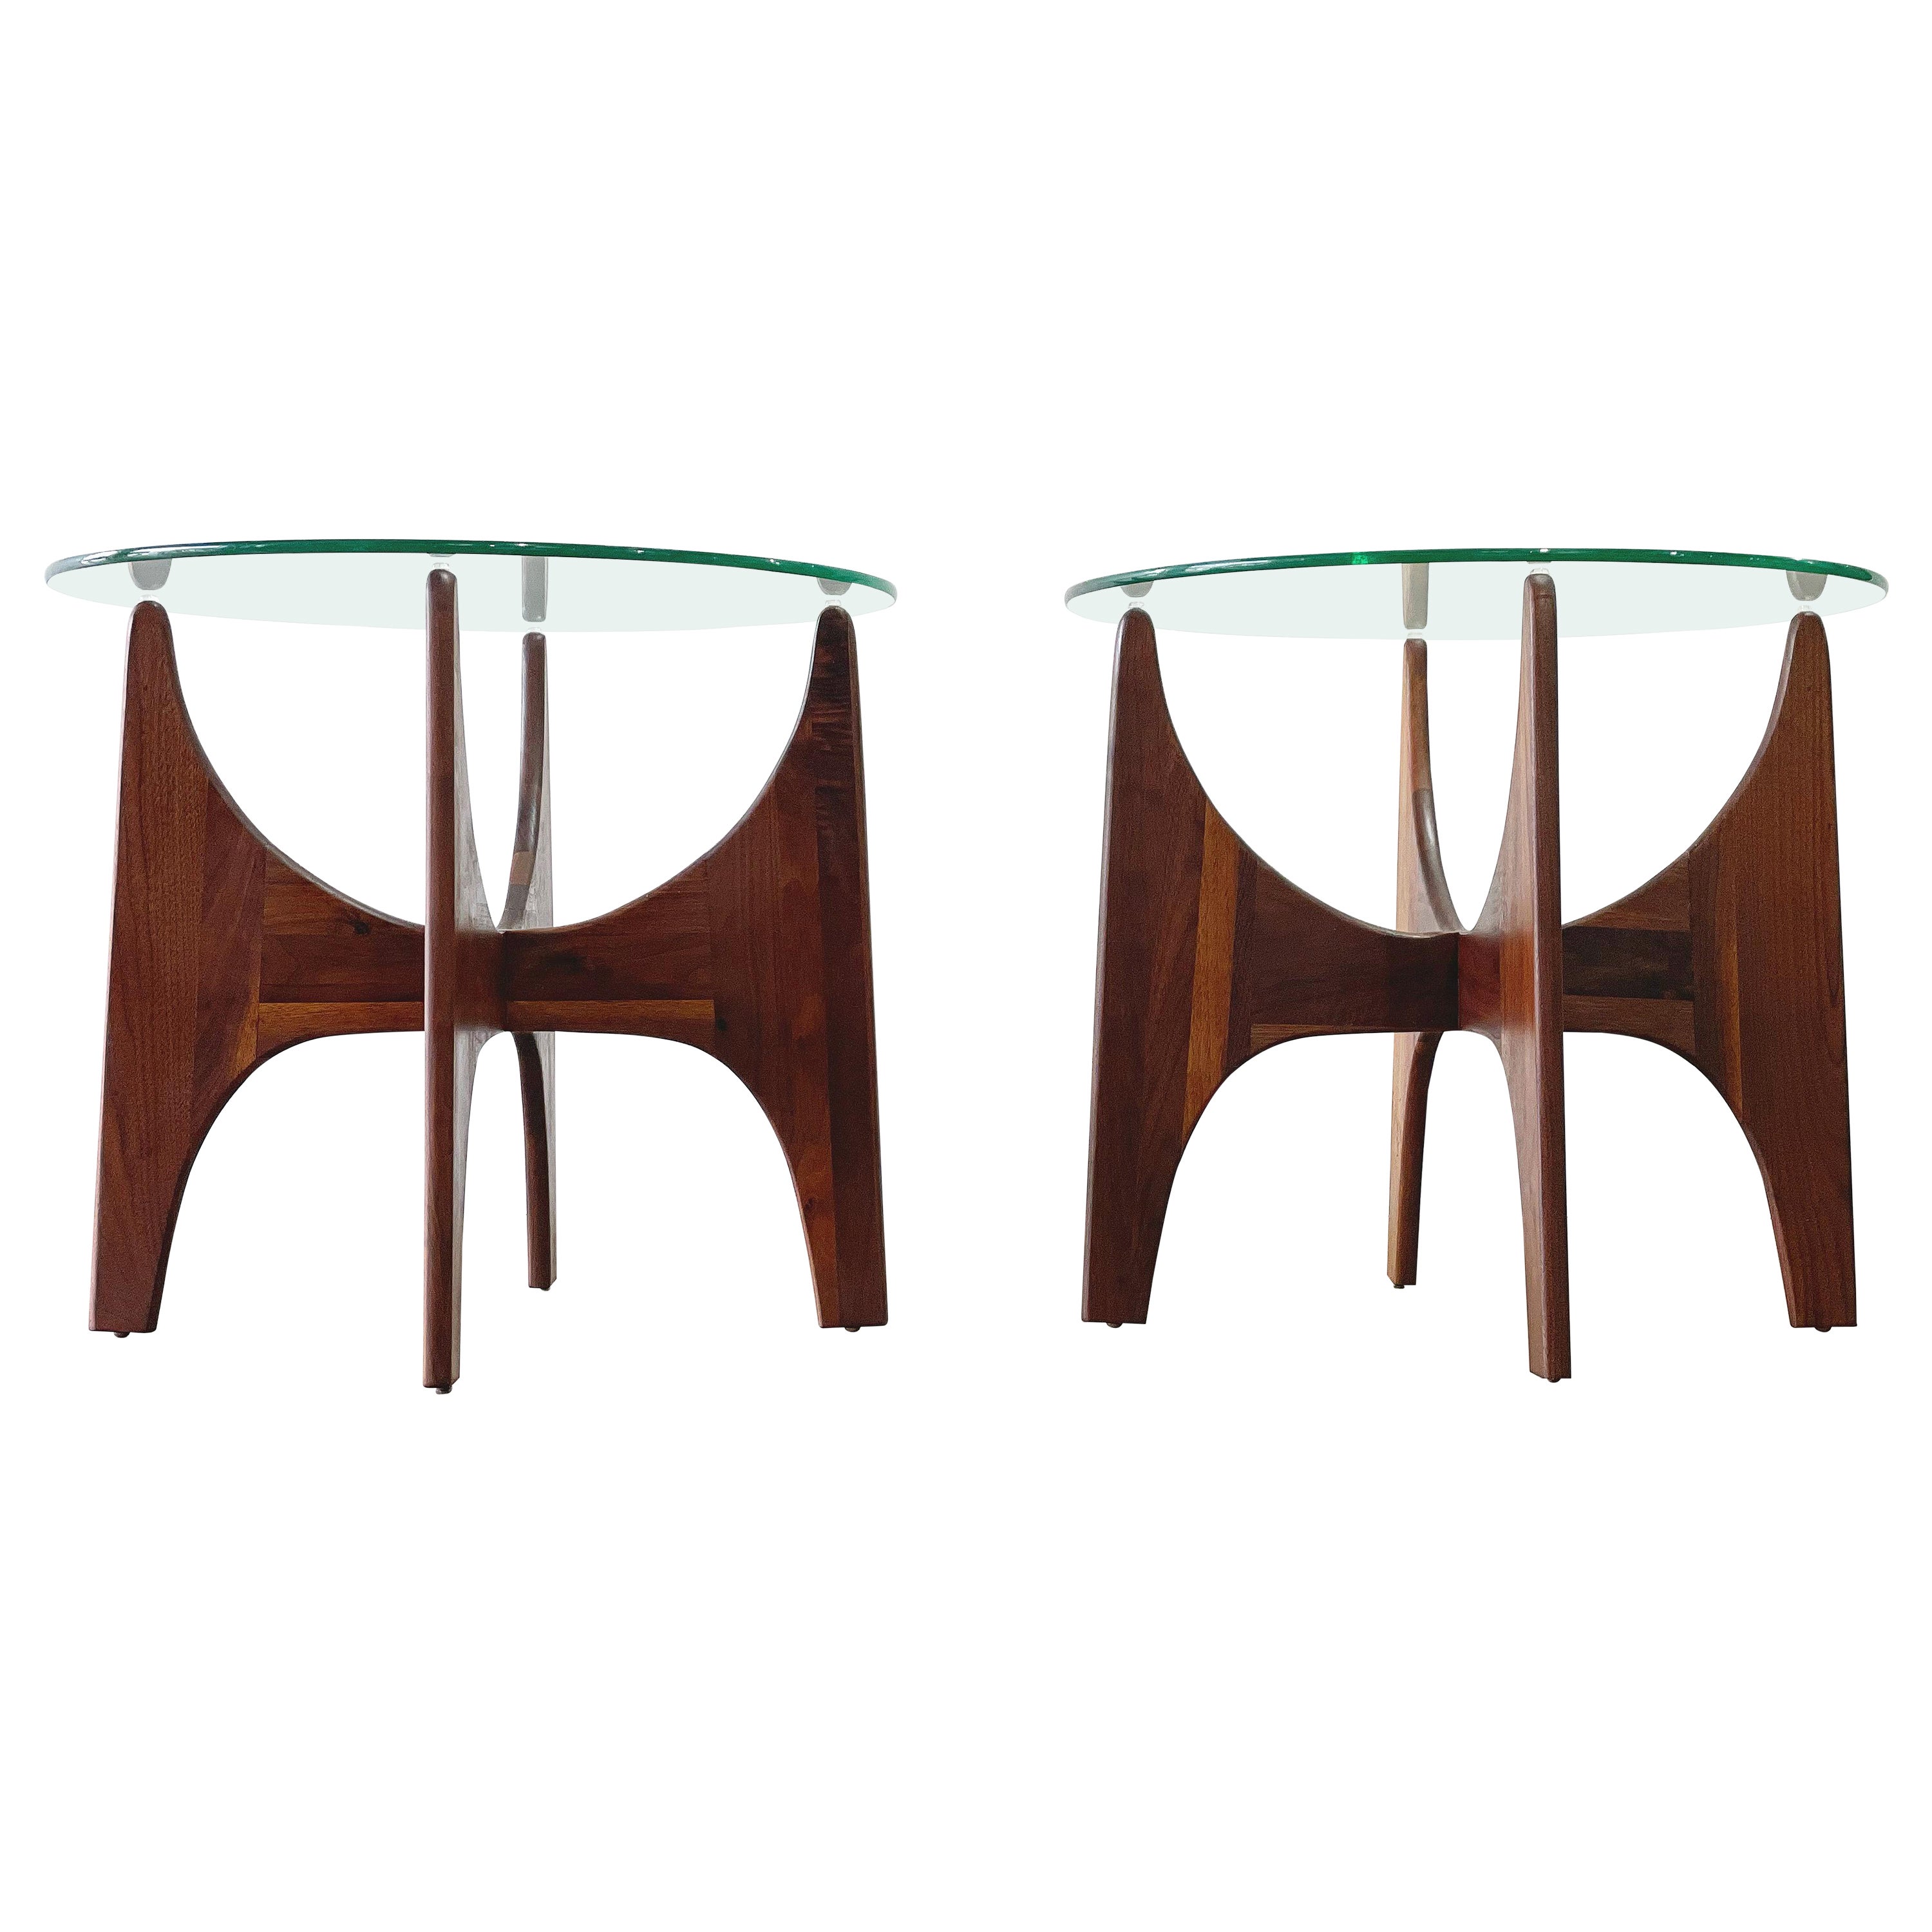 Pair Adrian Pearsall Side Tables for Craft Associates, Walnut, Model 1924-T24